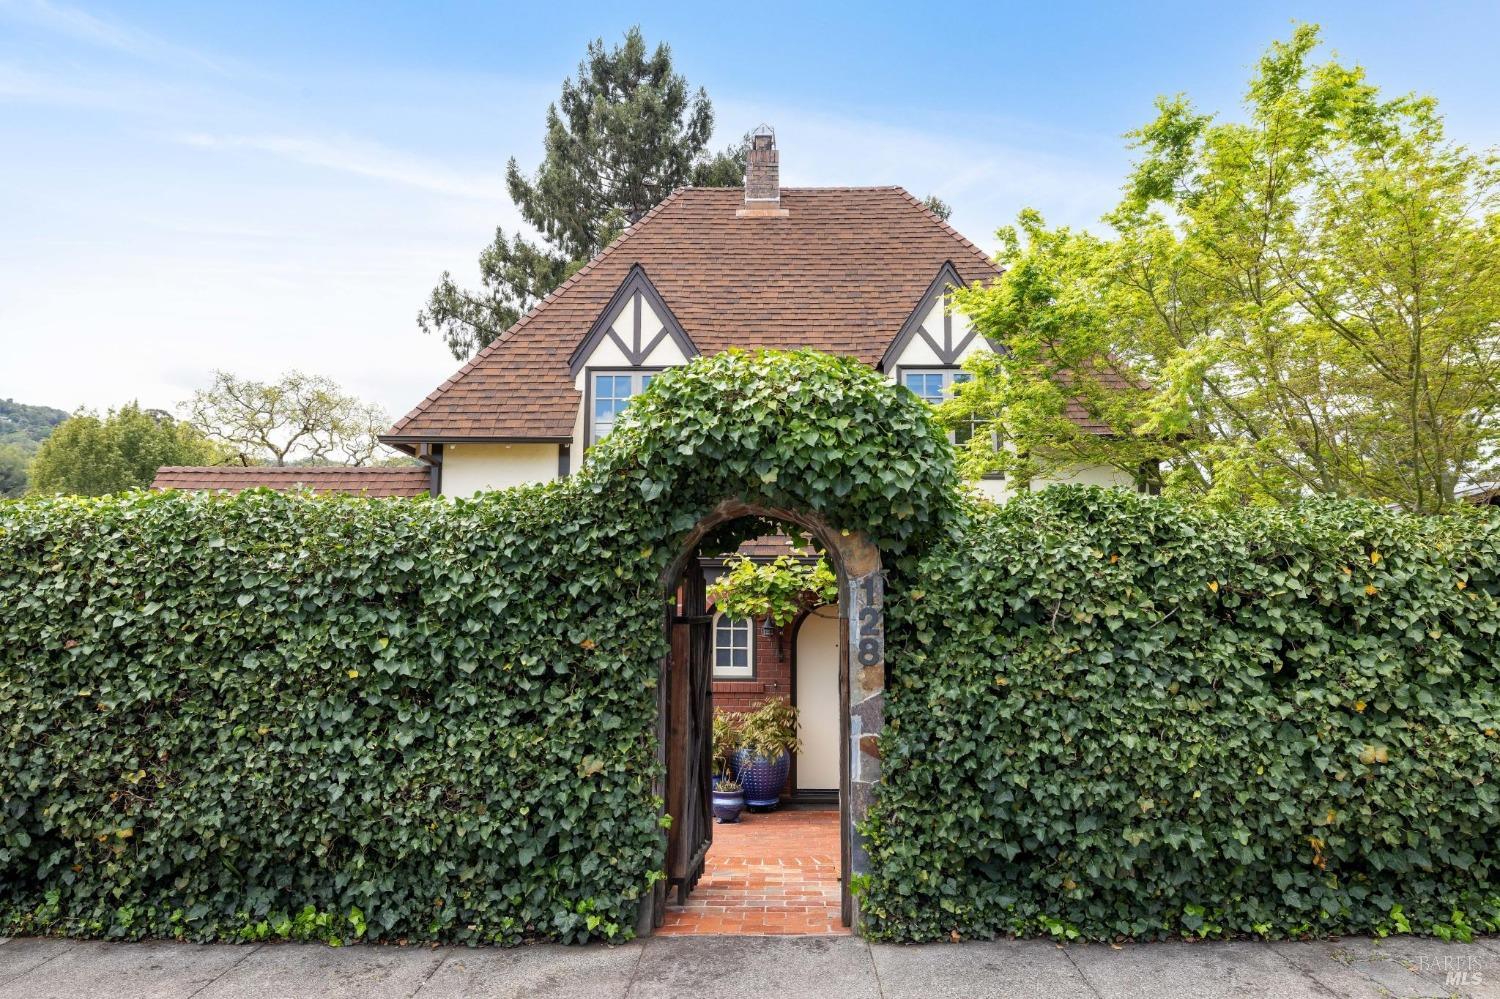 Welcome to 128 Calumet Avenue, on one of San Anselmo's most beloved historic streets.